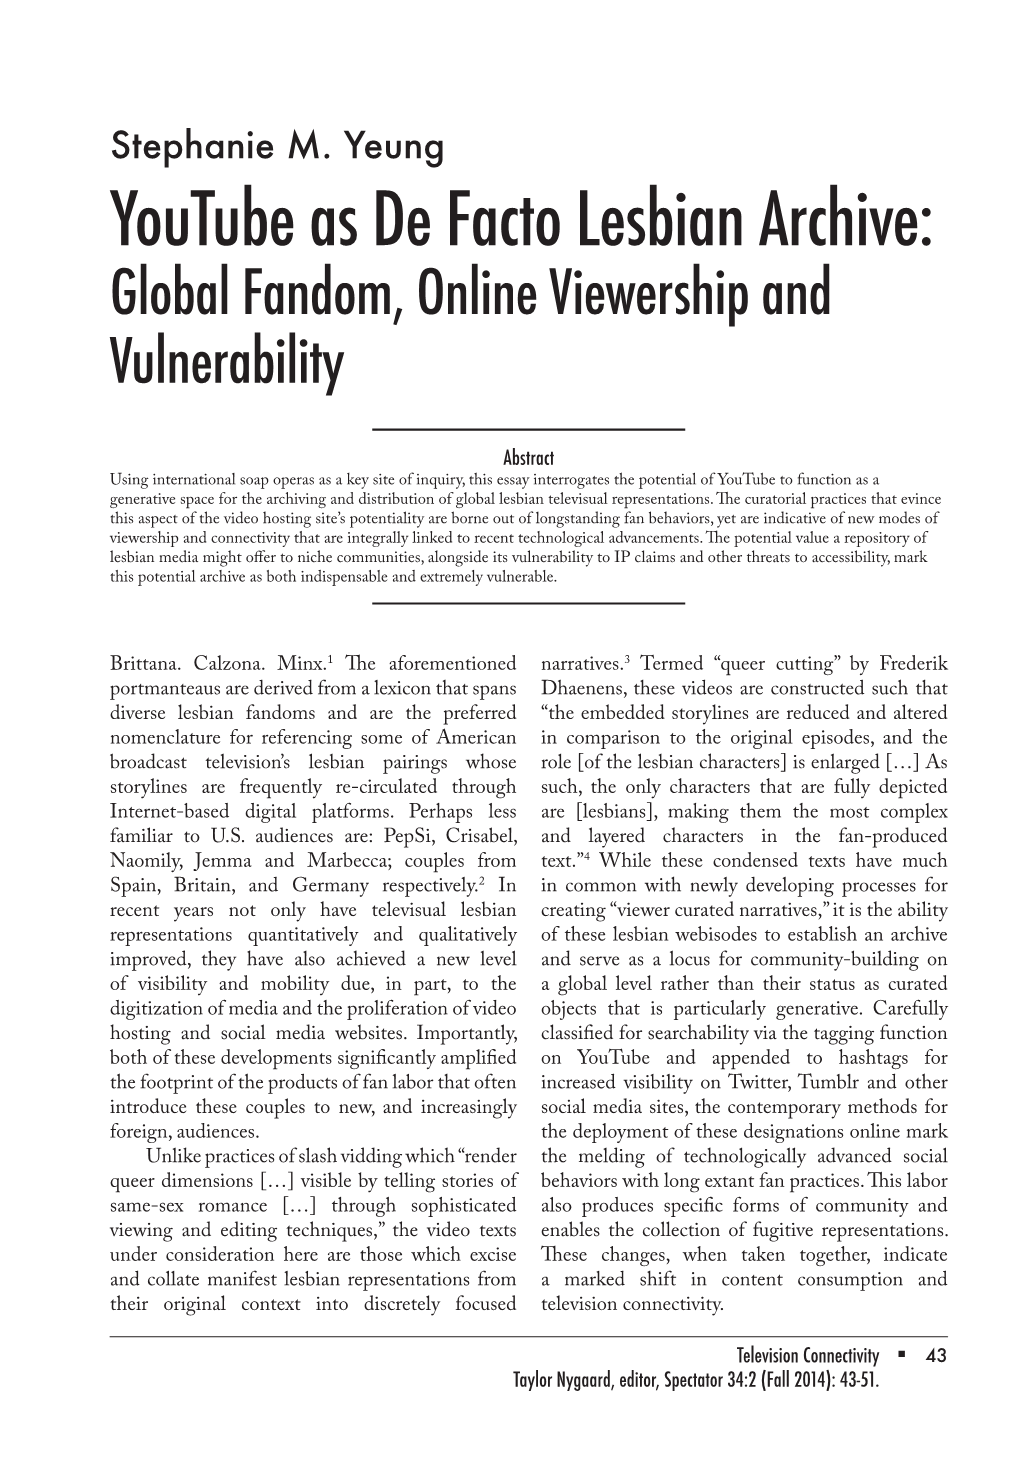 Youtube As De Facto Lesbian Archive: Global Fandom, Online Viewership and Vulnerability